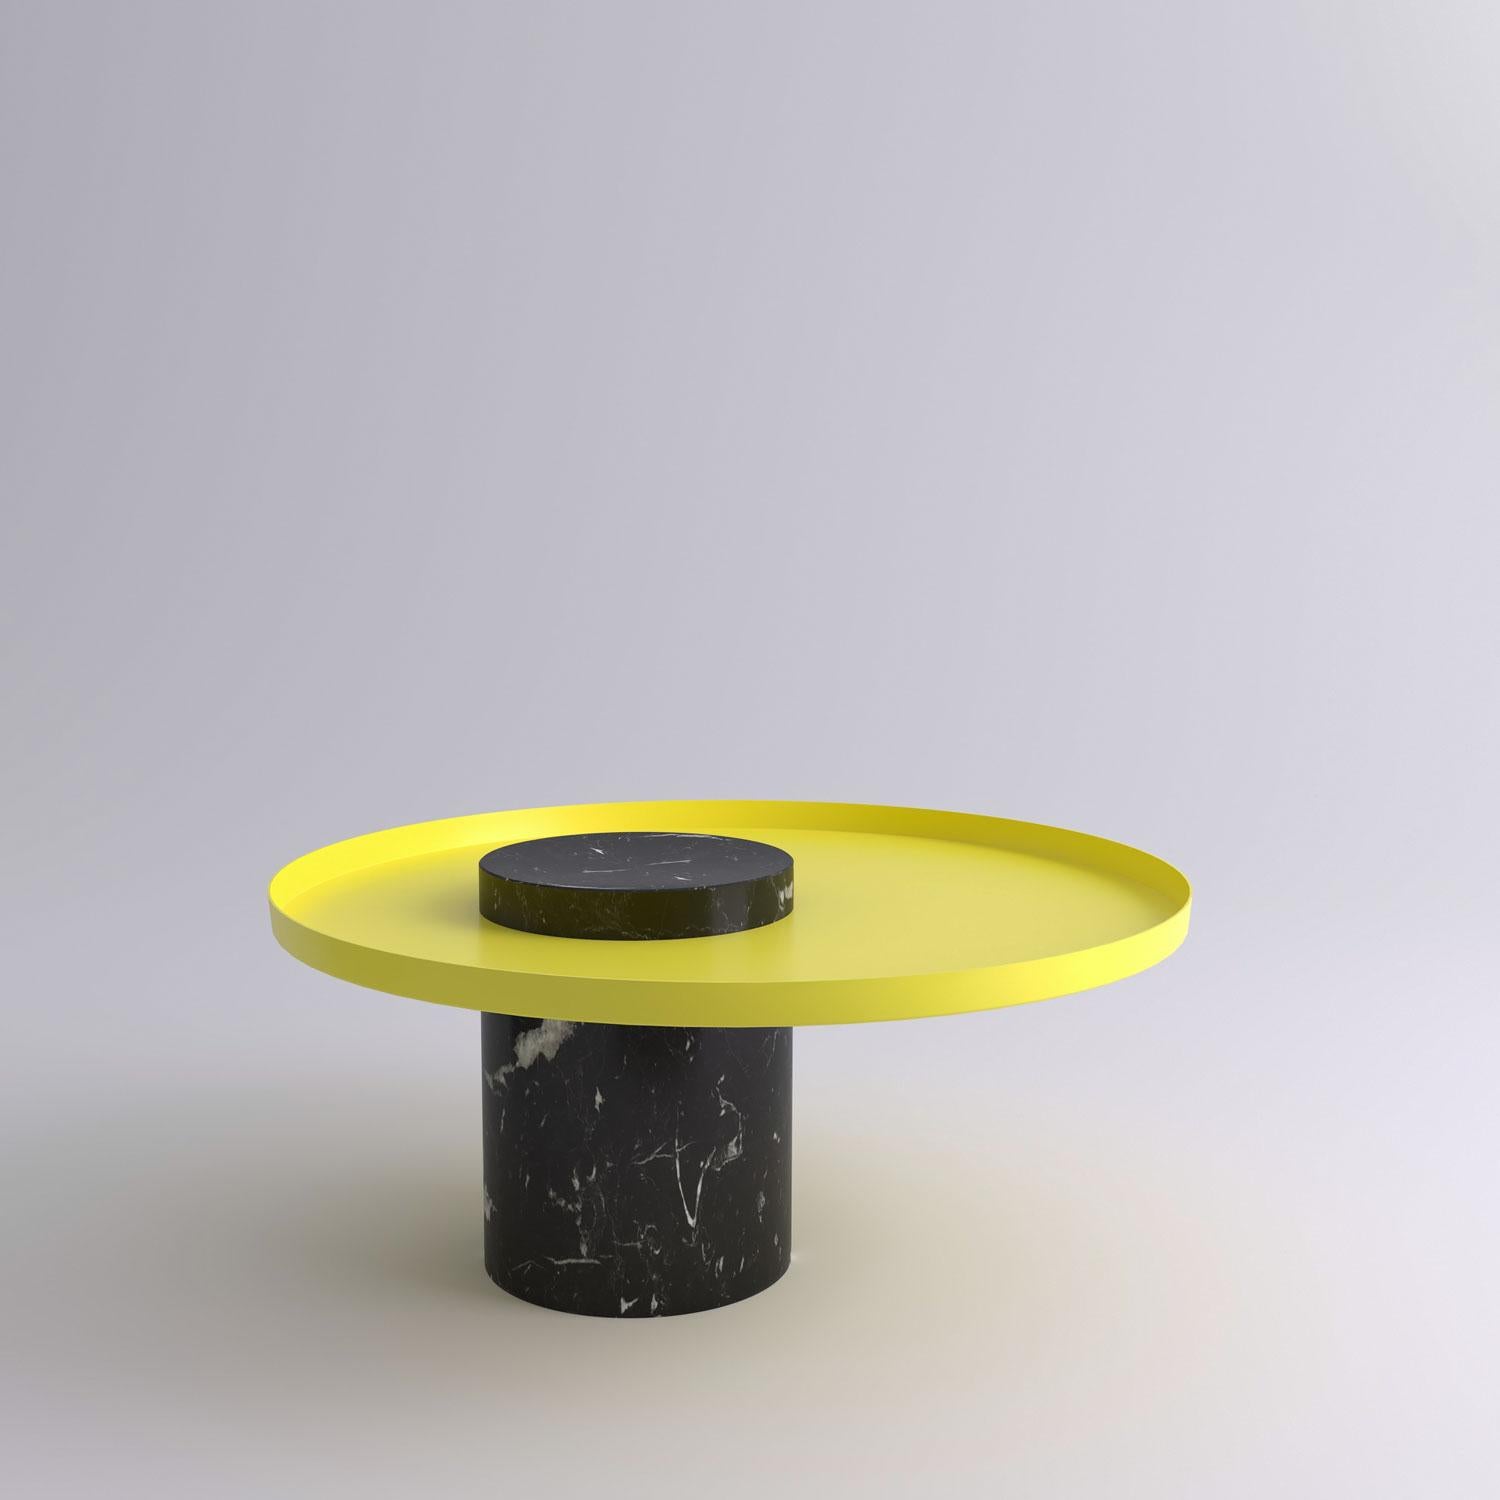 Low black marquina marble contemporary guéridon, Sebastian Herkner
Dimensions: D 70 x H 33 cm
Materials: Black Marquina marble, yellow metal tray

The salute table exists in 3 sizes, 4 different marble stones for the column and 5 different finishes